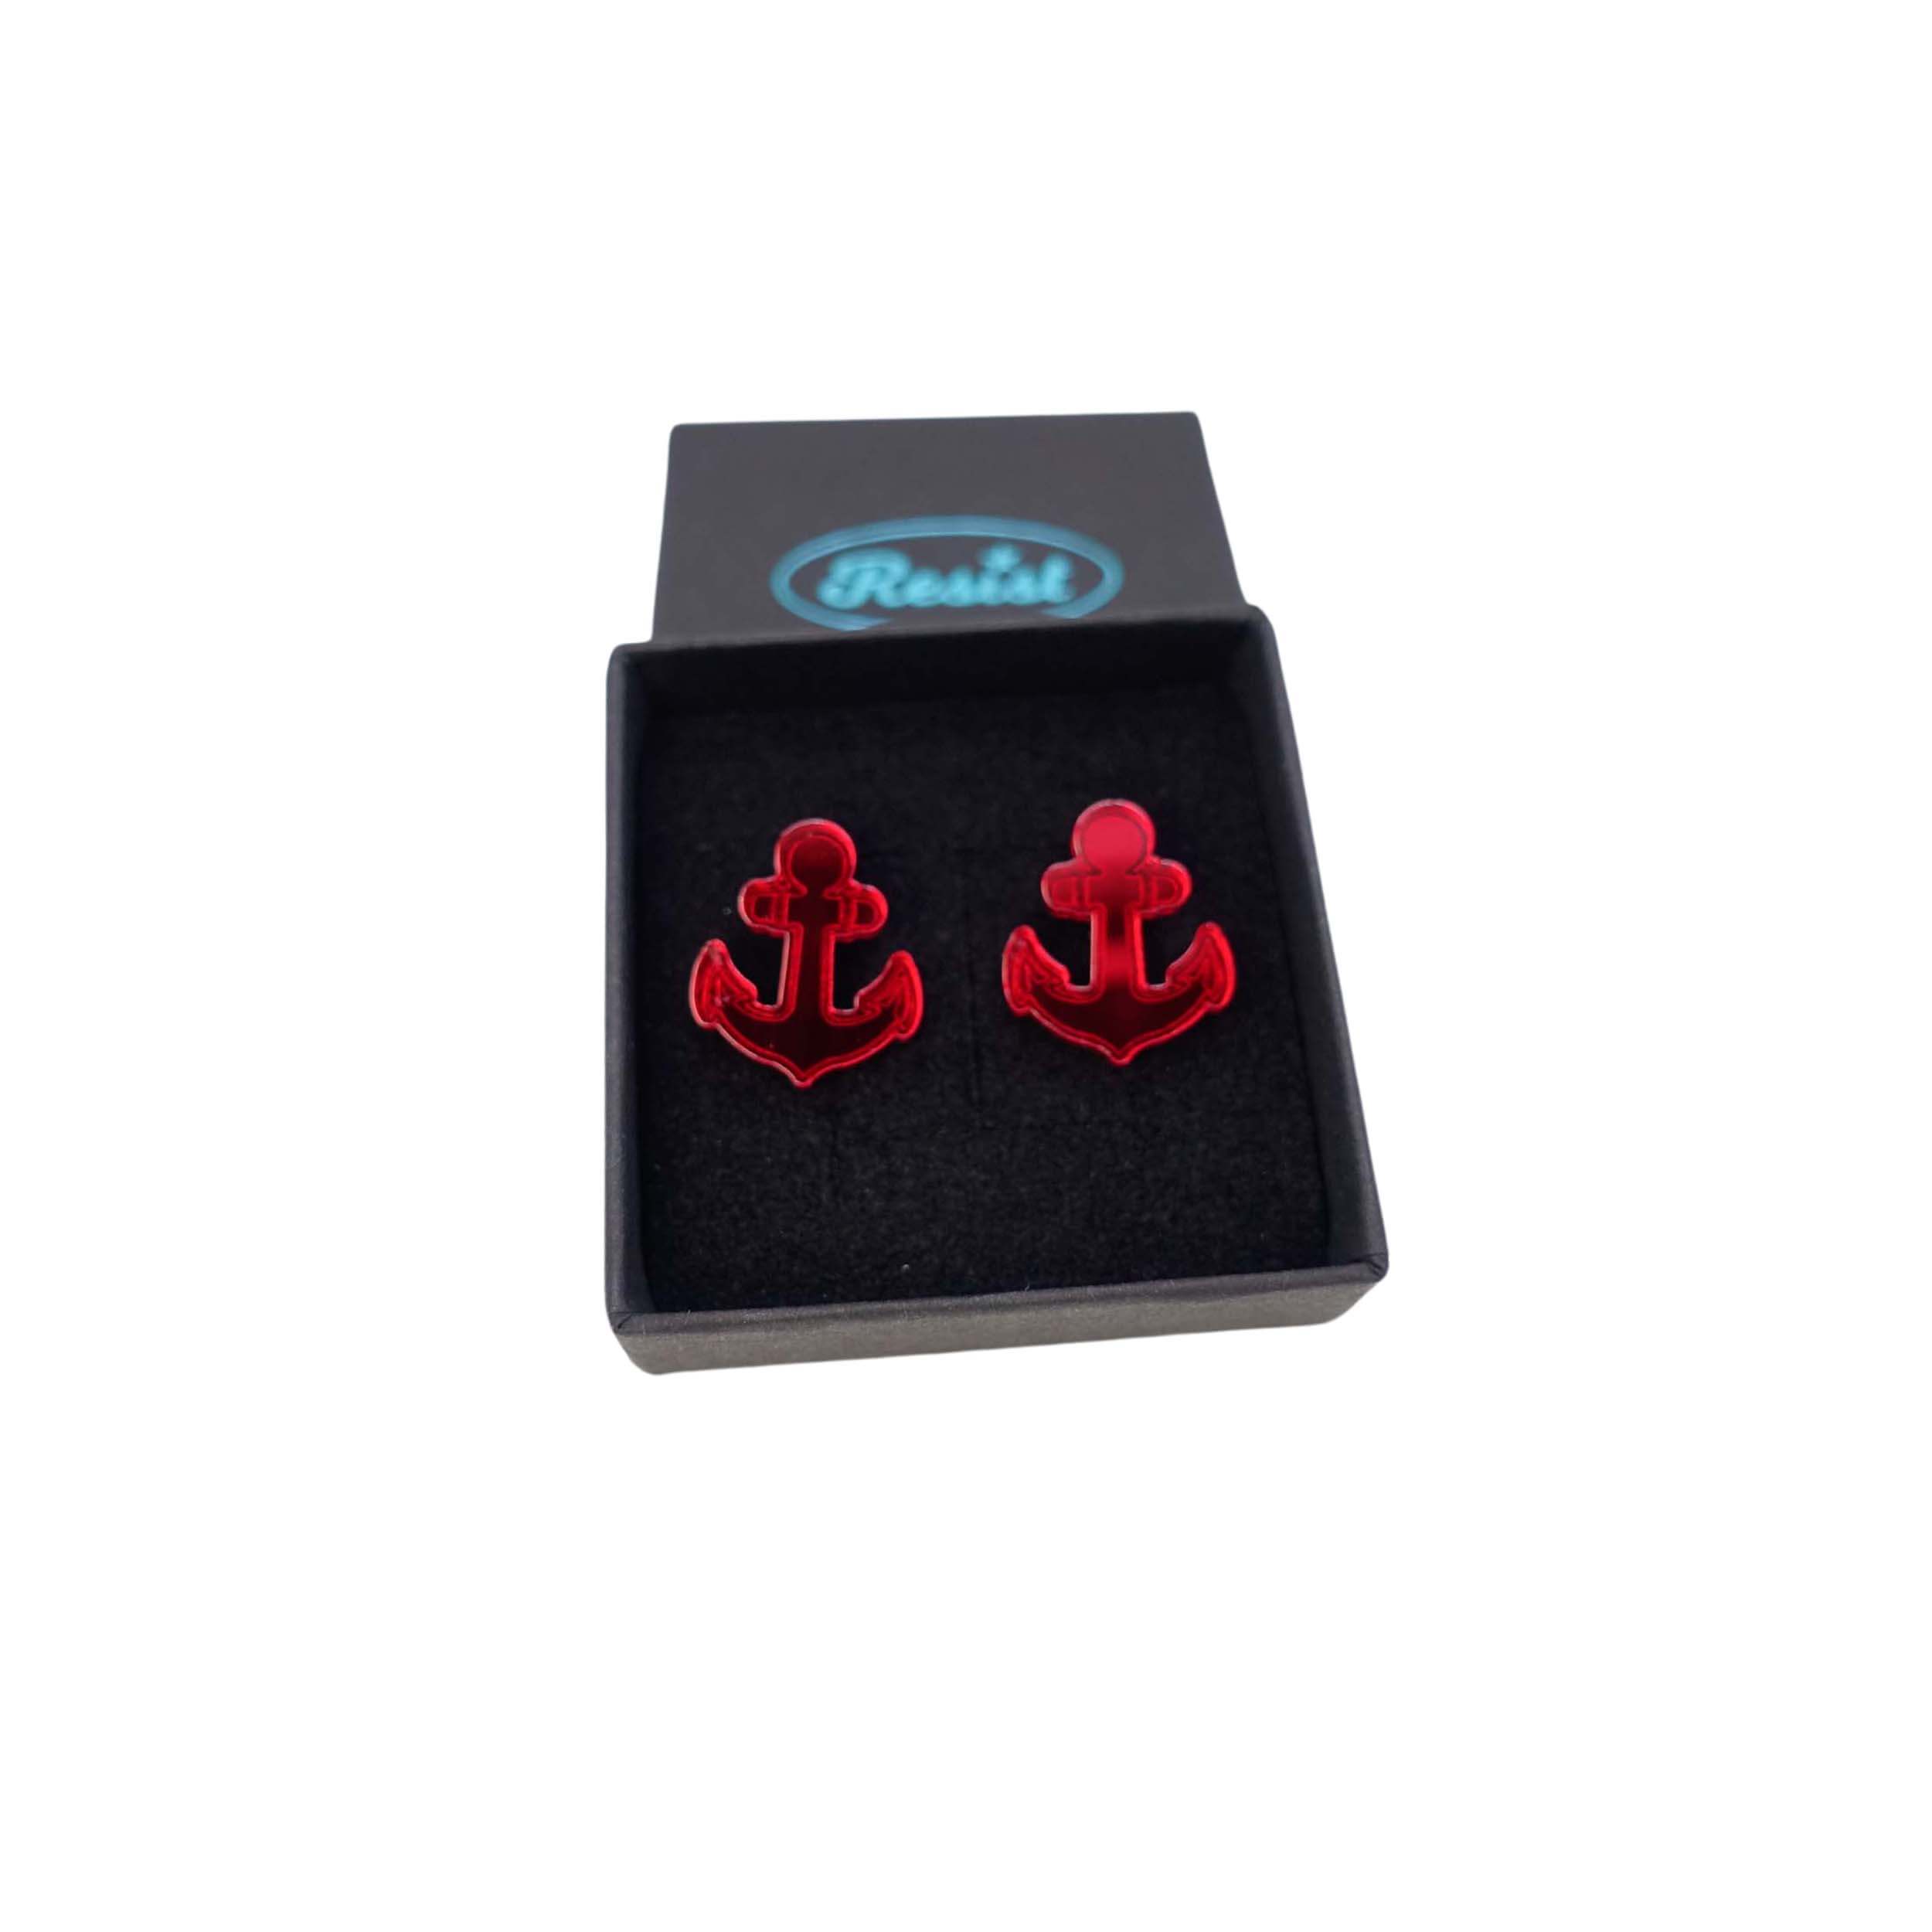 Ruby red mirror little anchor earrings shown in a Wear and Resist gift box. 